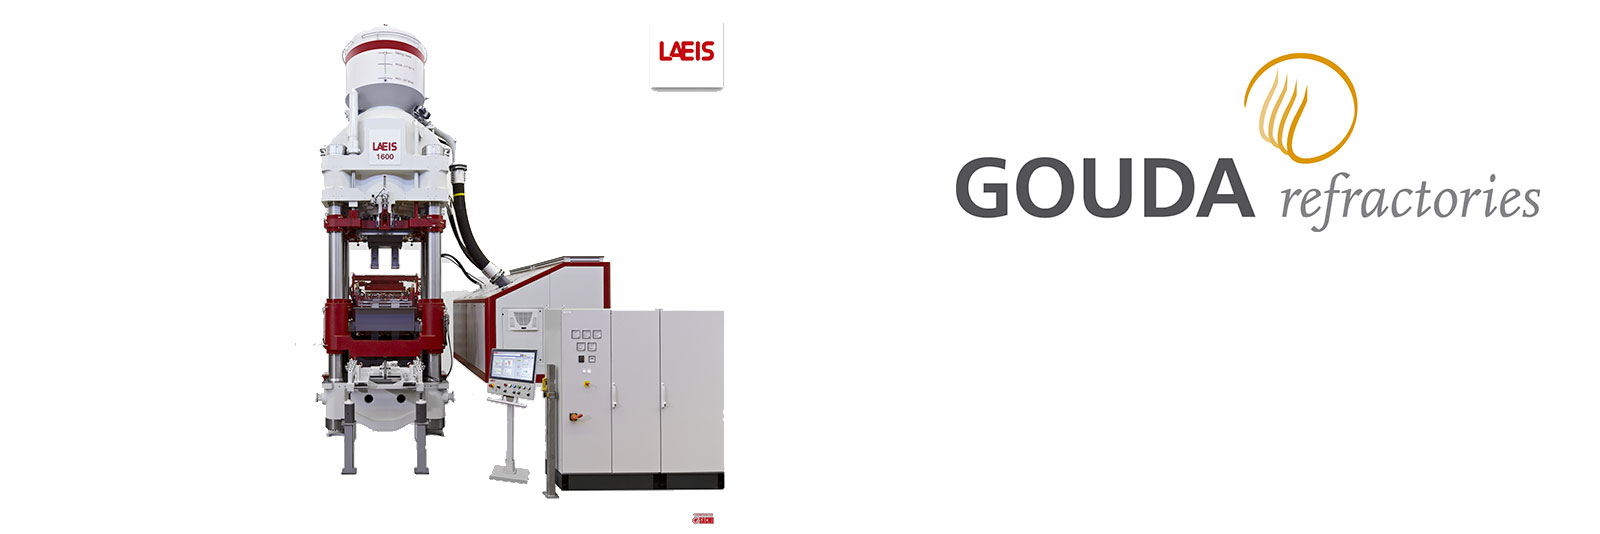 State-of-the-art LAEIS refractory press ordered by GOUDA Refractories.